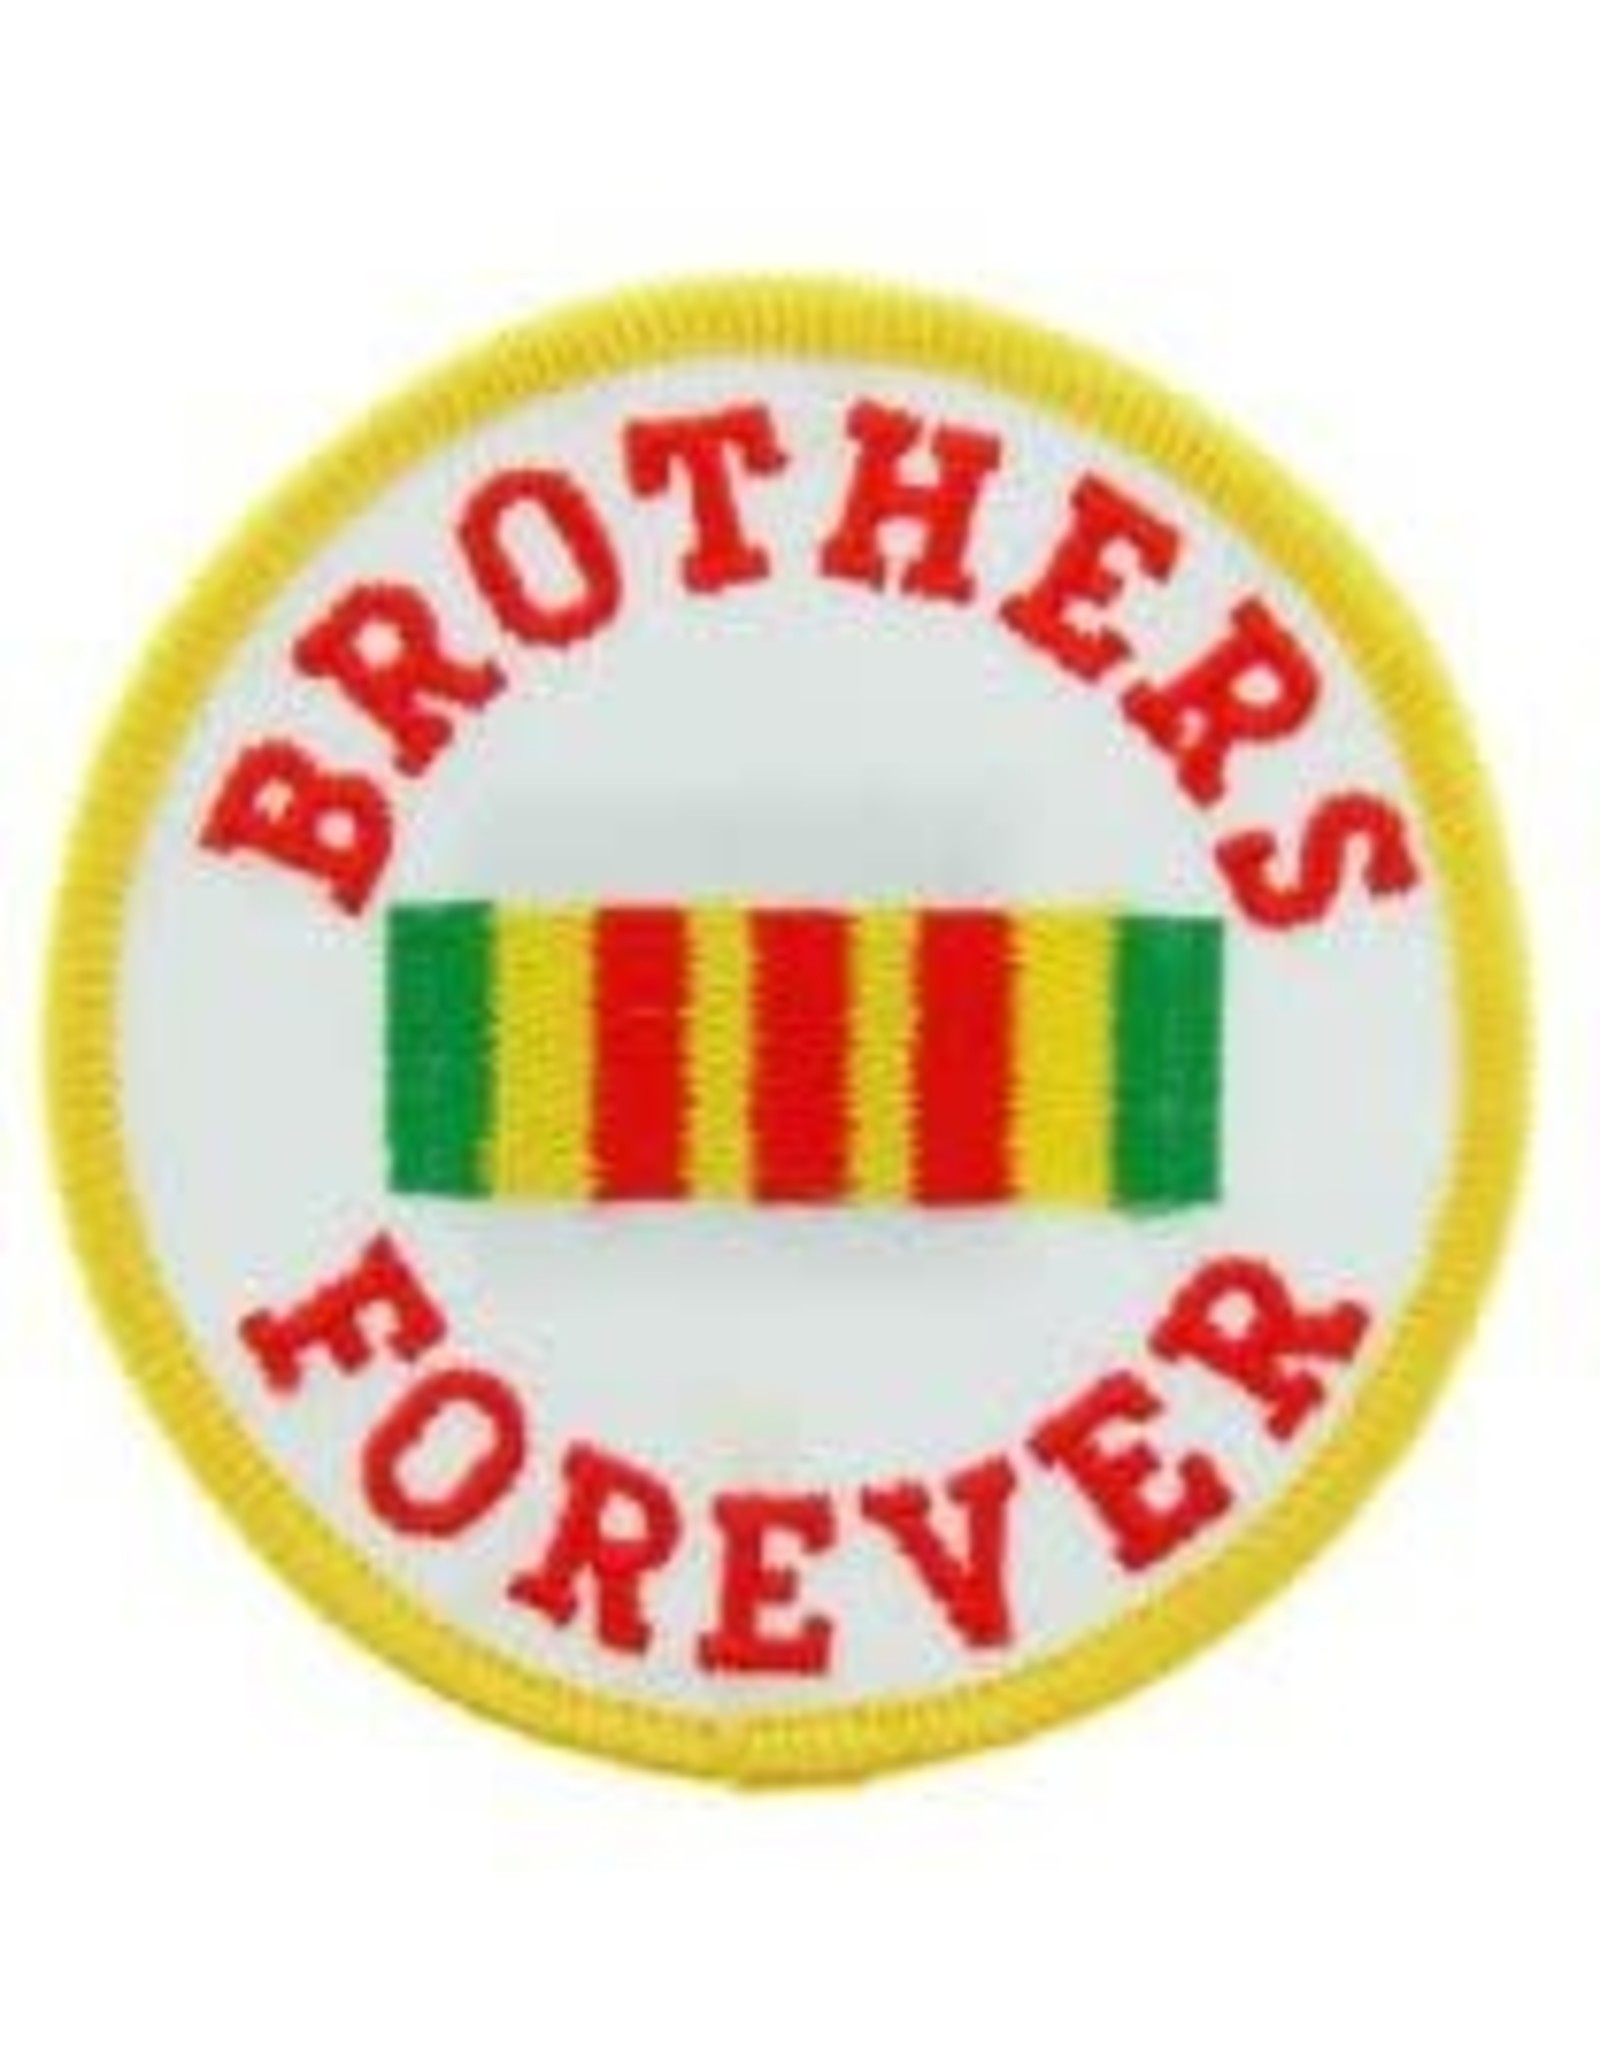 Patch - Vietnam Brothers Forever